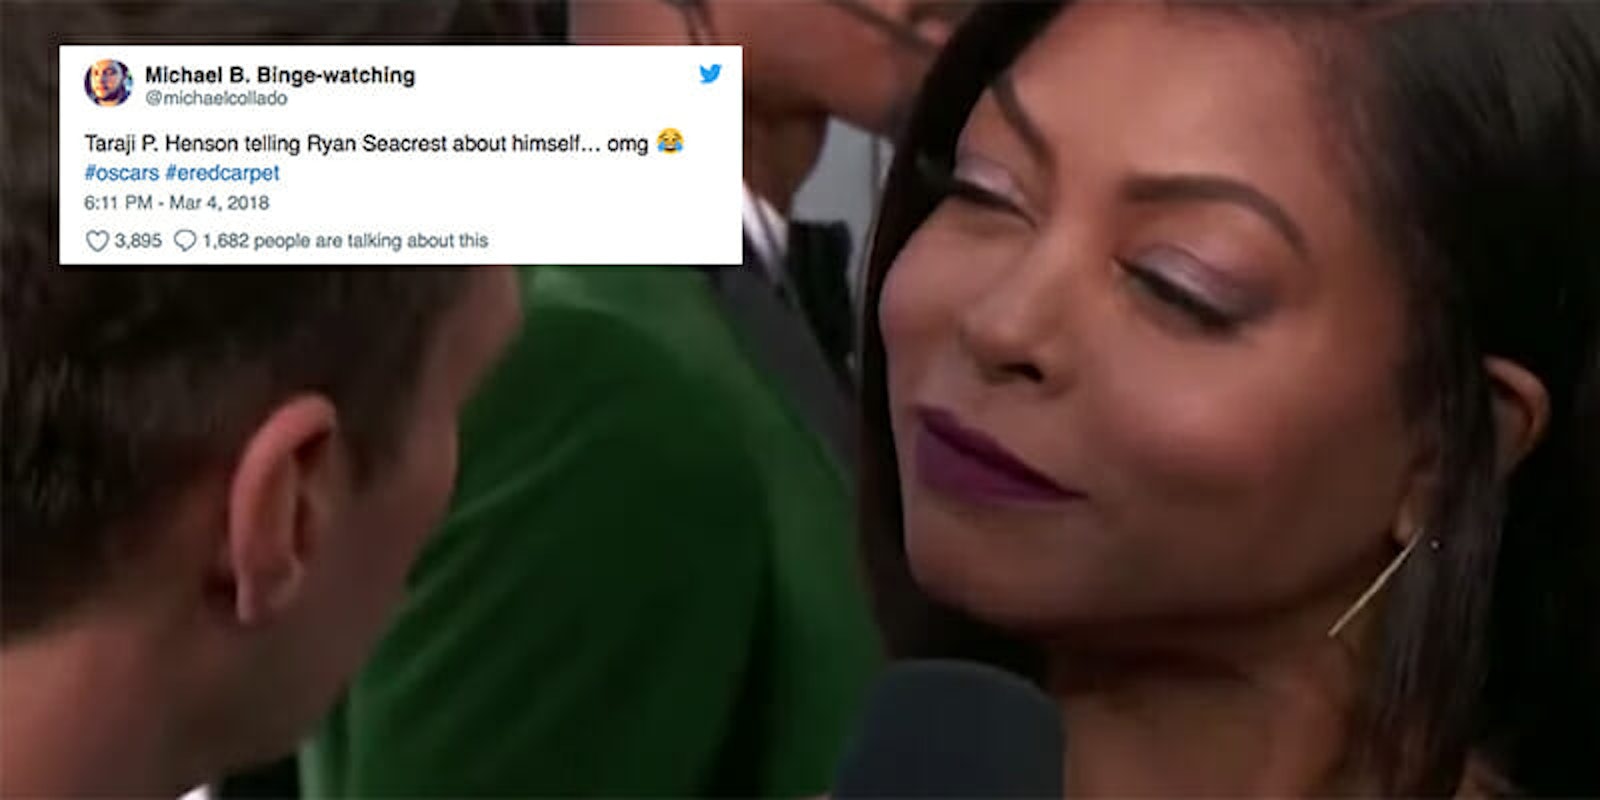 Taraji P. Henson subtly snubbed Ryan Seacrest on the Oscars red carpet following details of sexual assault accusations against him.